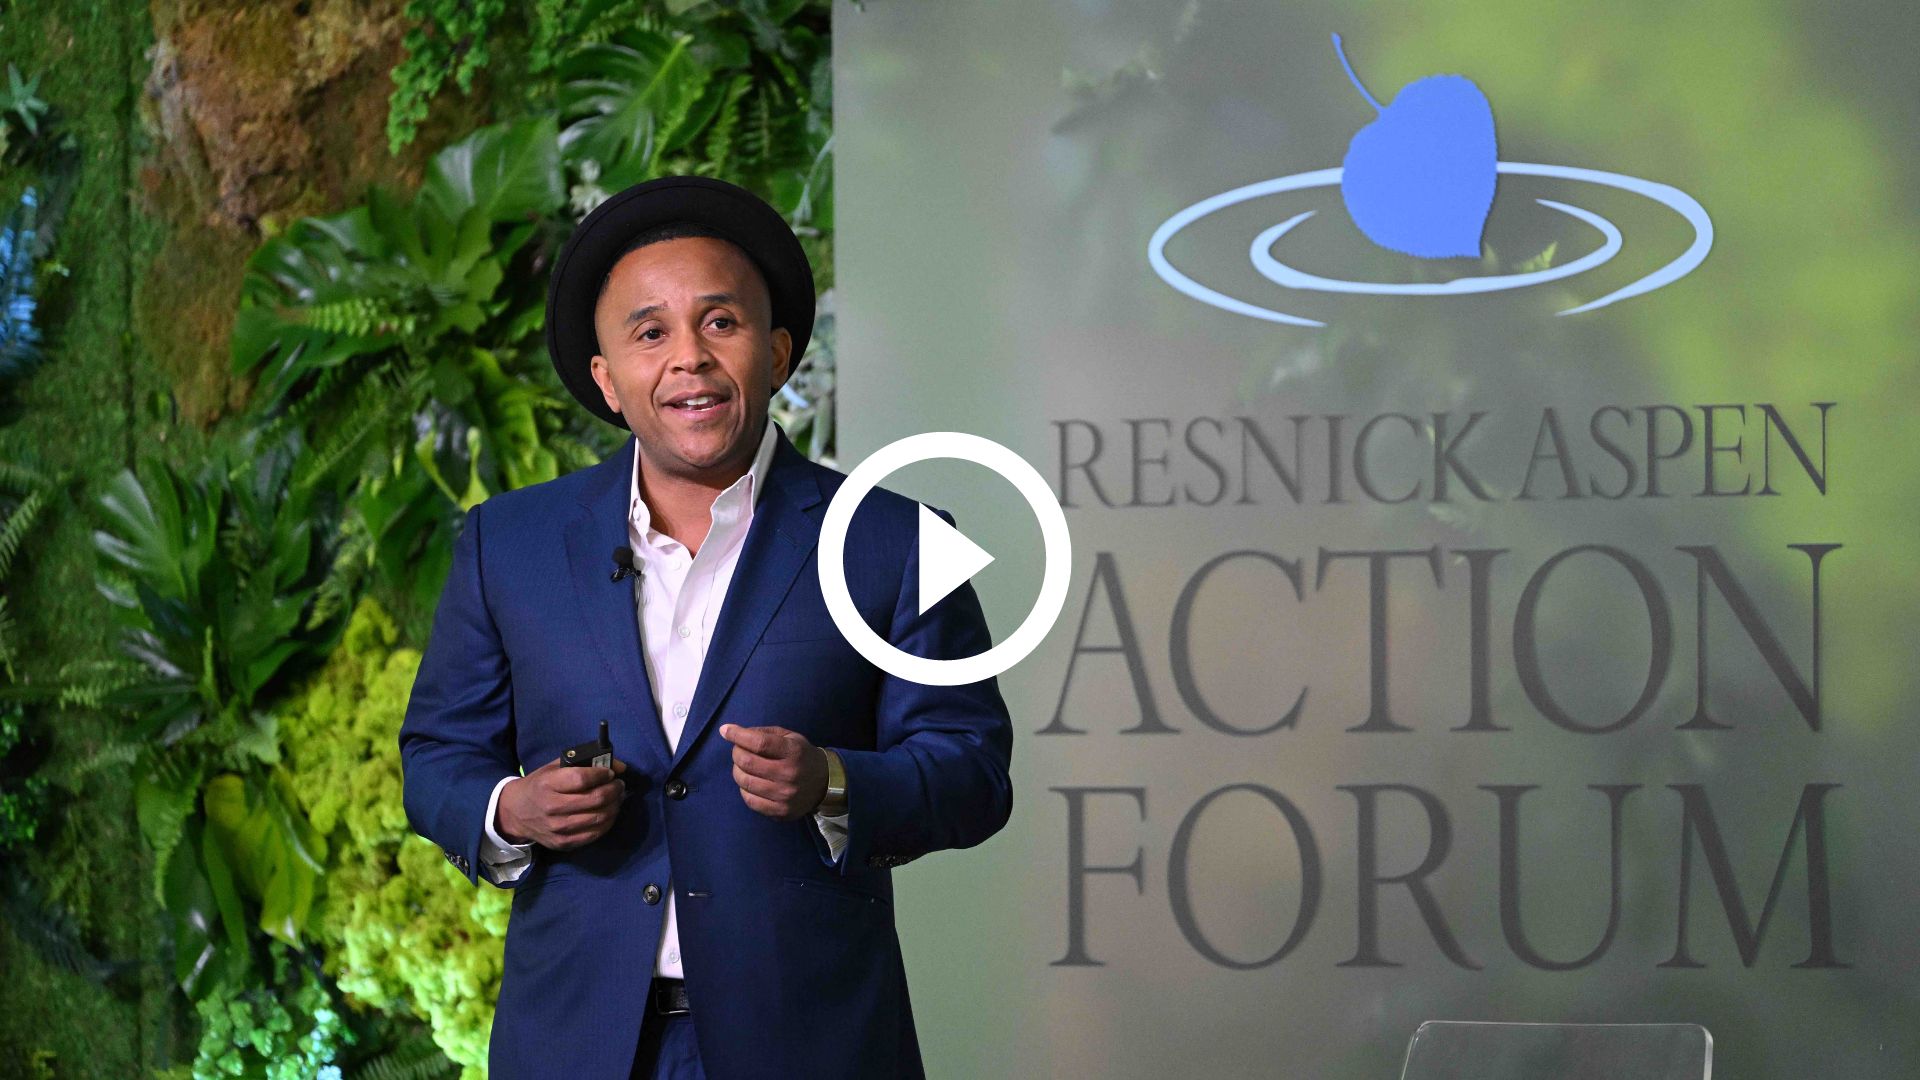 The Pathway to Racial Justice in the United States: Rashad Robinson at the 2022 Resnick Aspen Action Forum